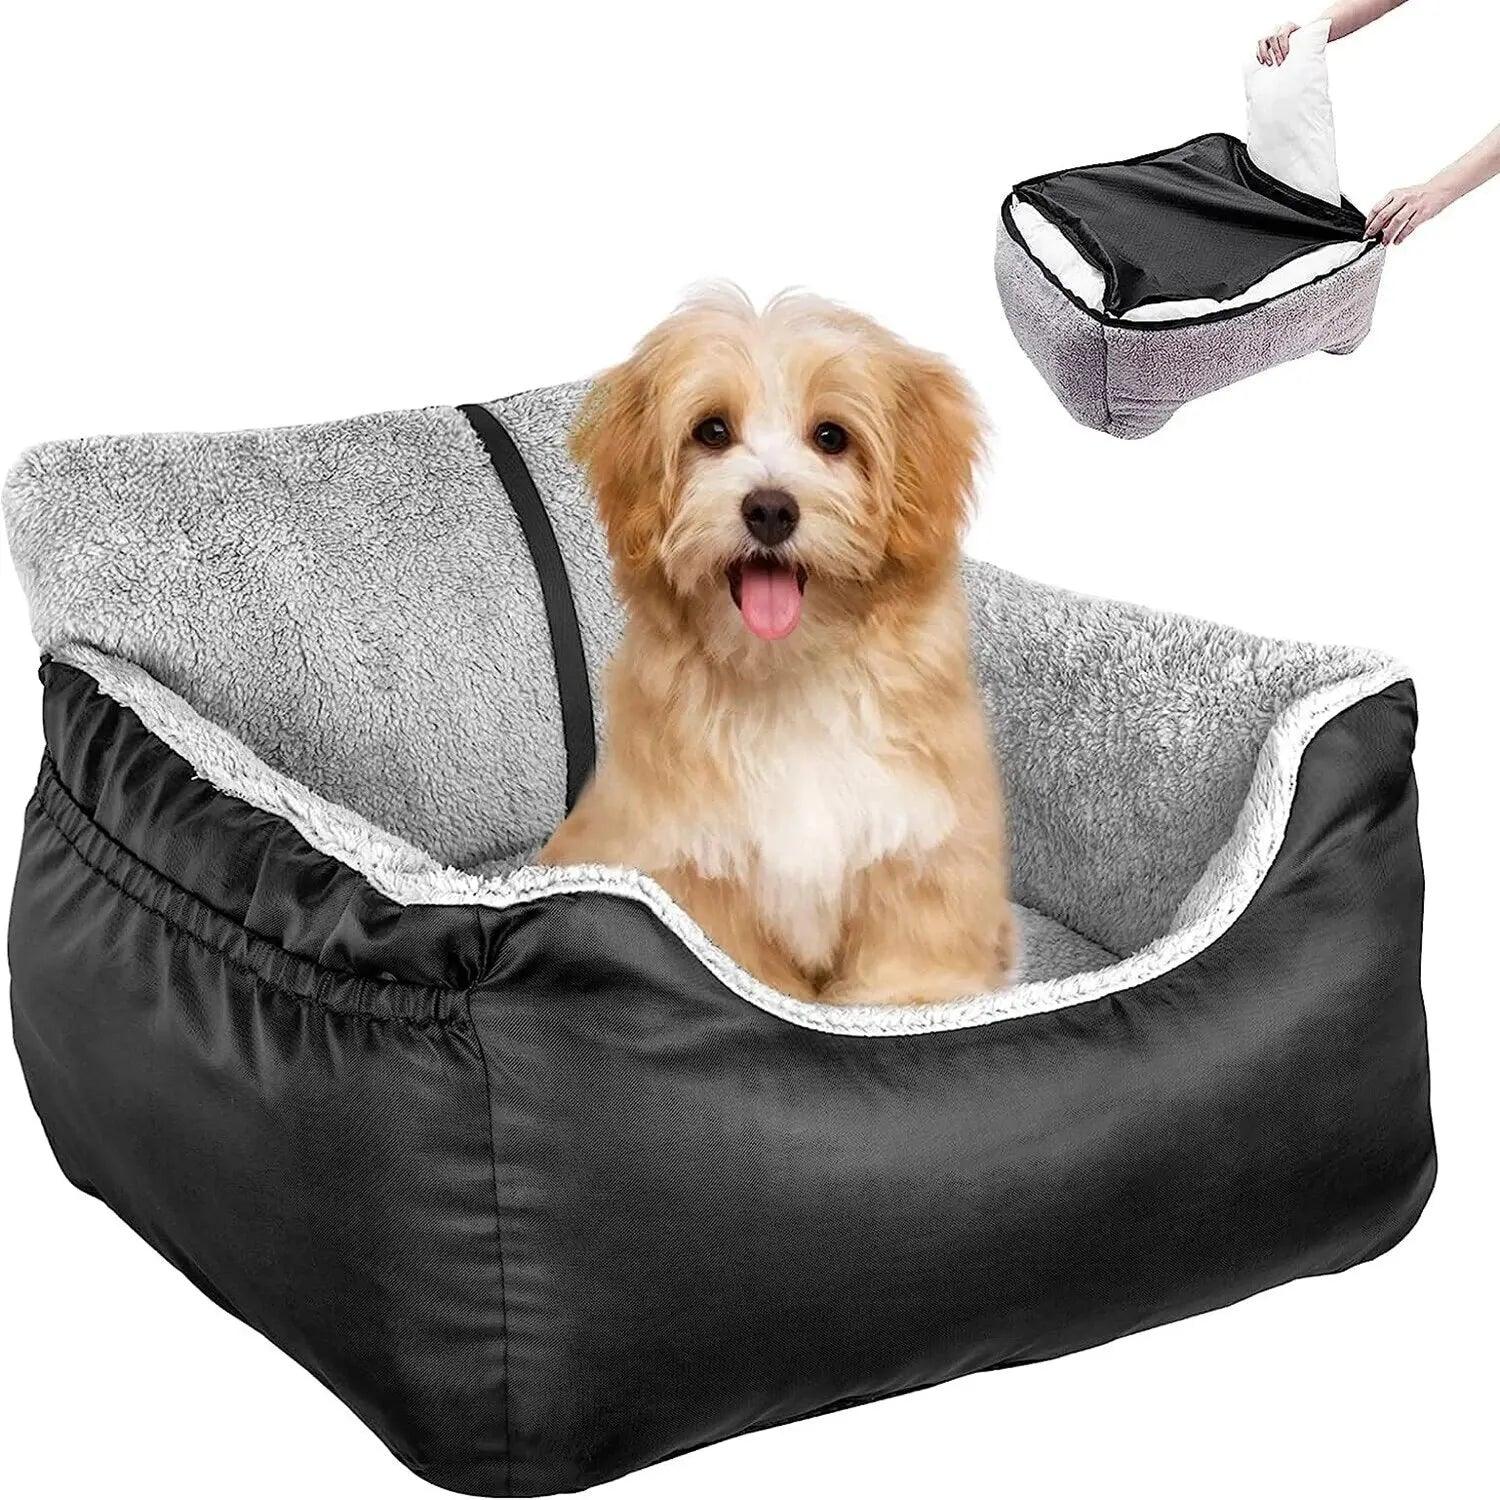 Pet Travel Carrier Bed with Adjustable Belts and Storage Pockets  ourlum.com   